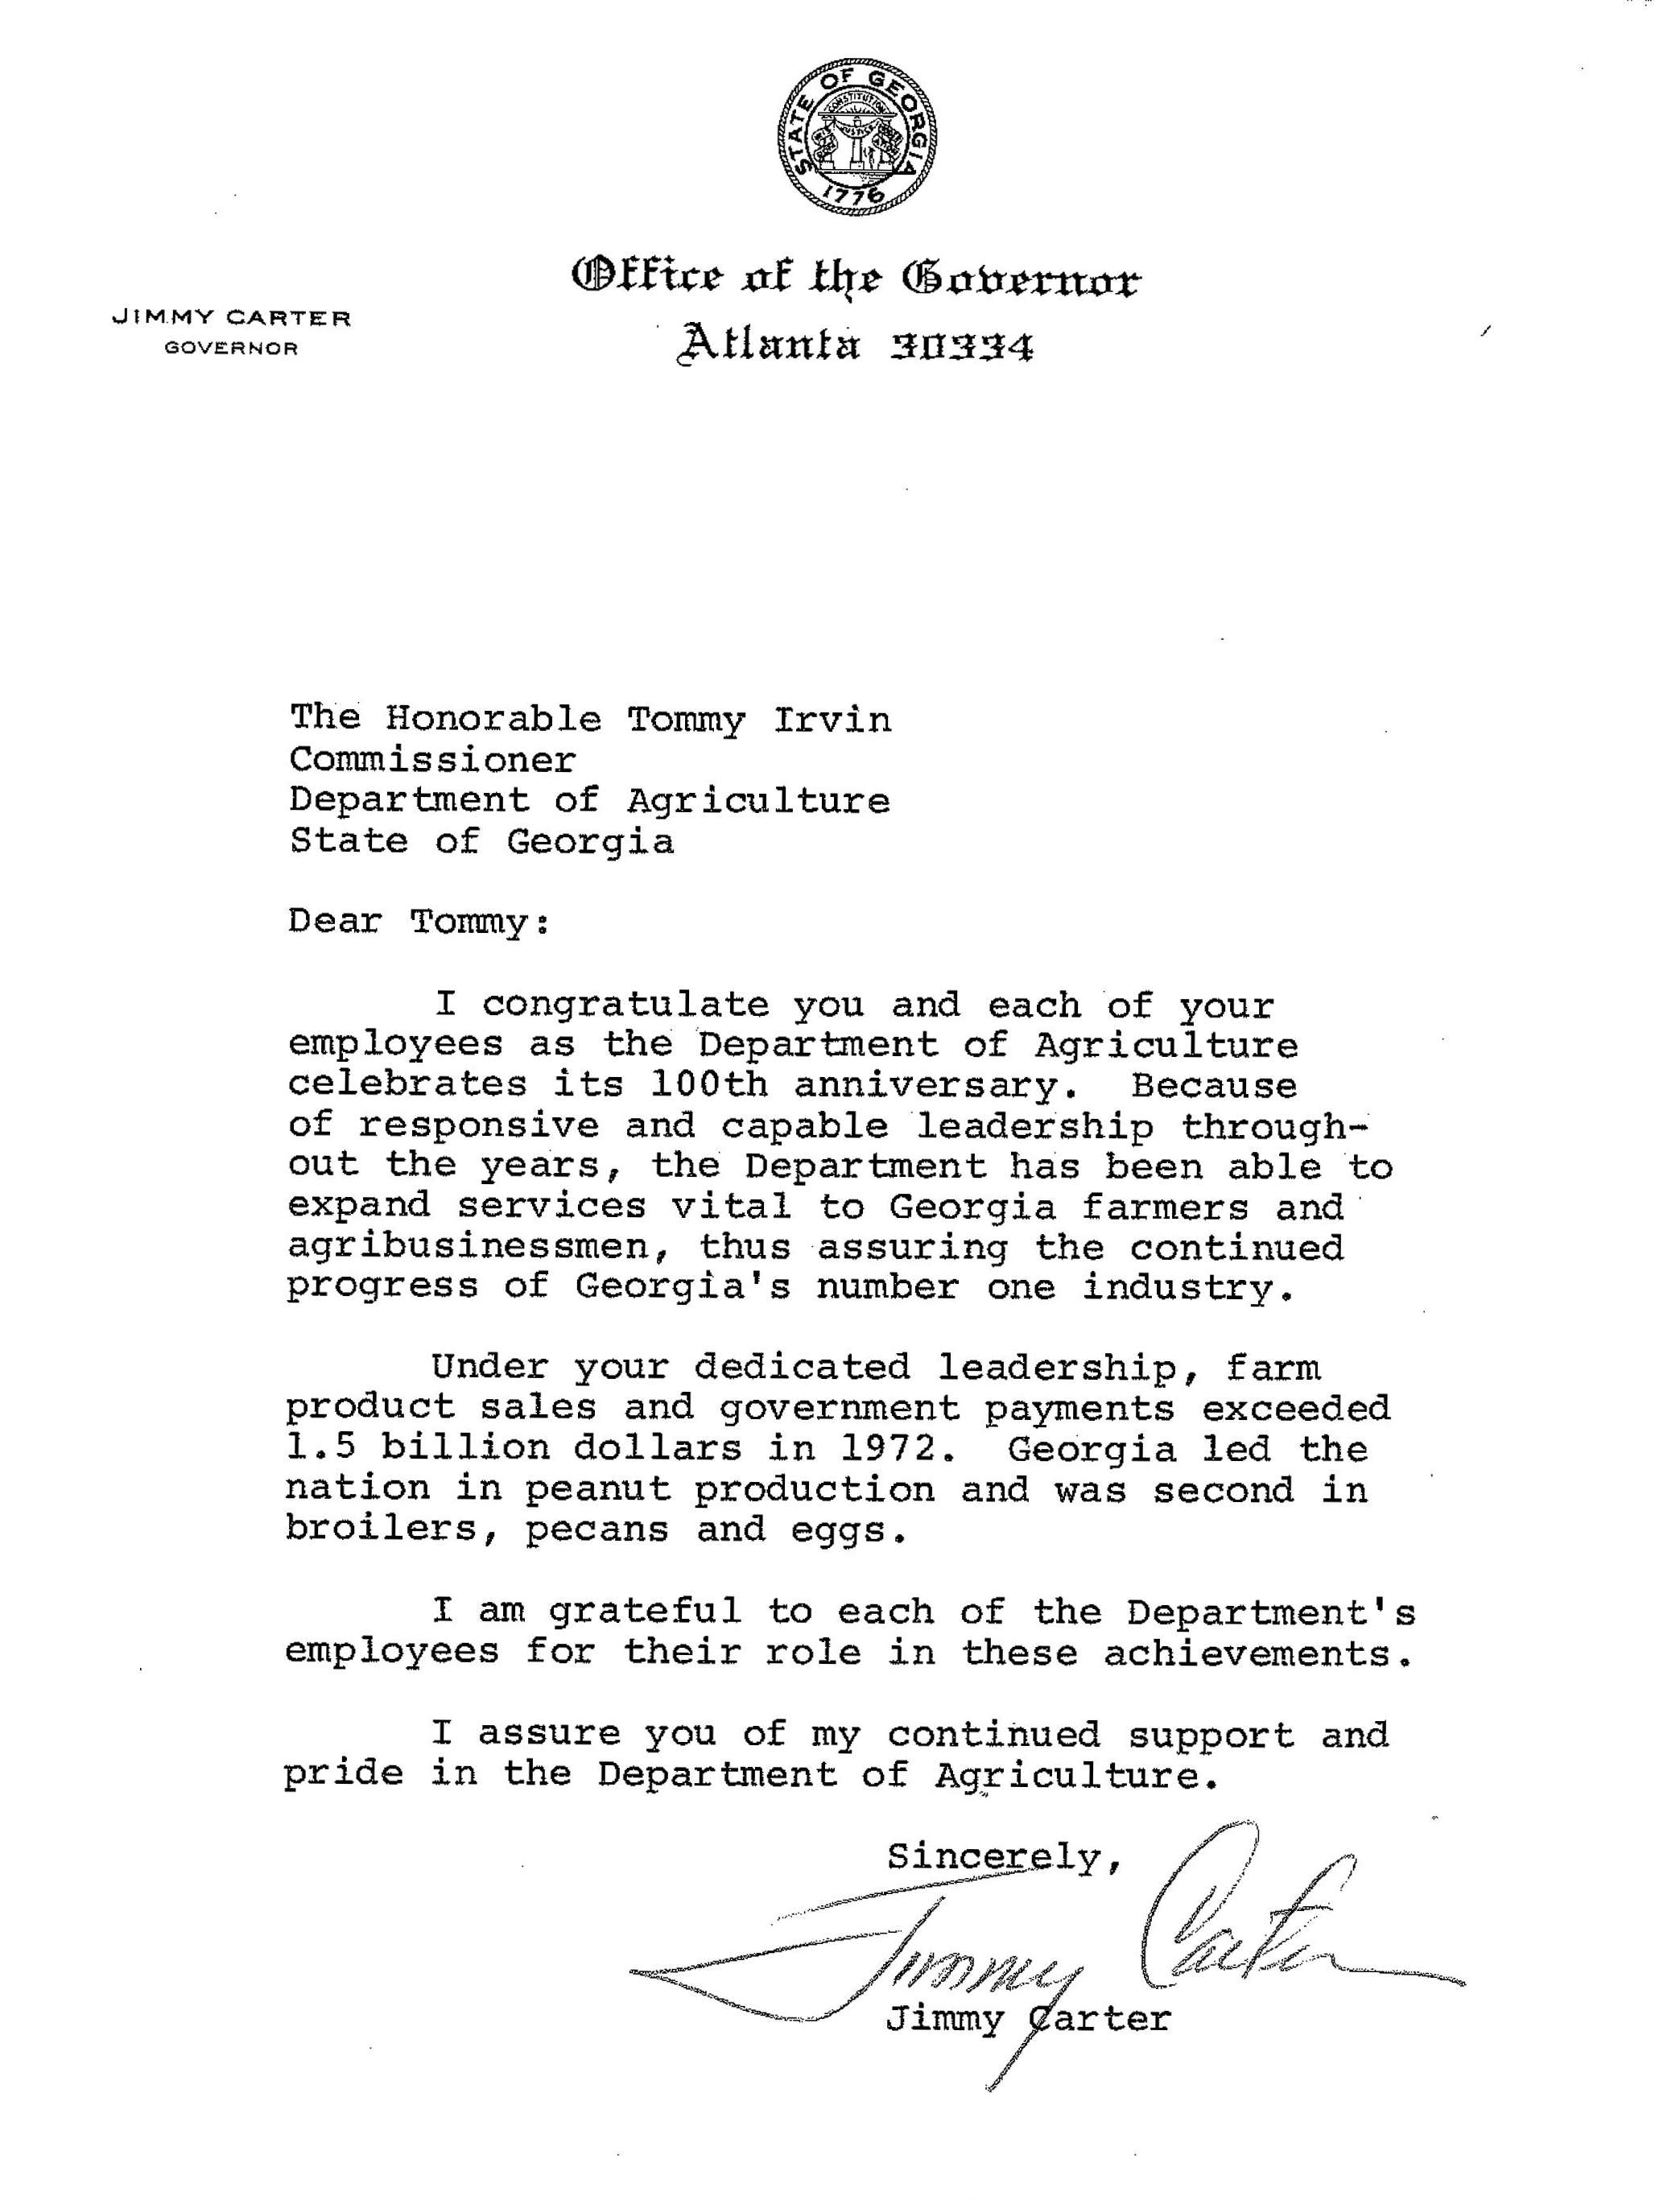 (1974) Congratulatory letter from President (then Governor) Jimmy Carter on the Departments 100th Anniversary. 